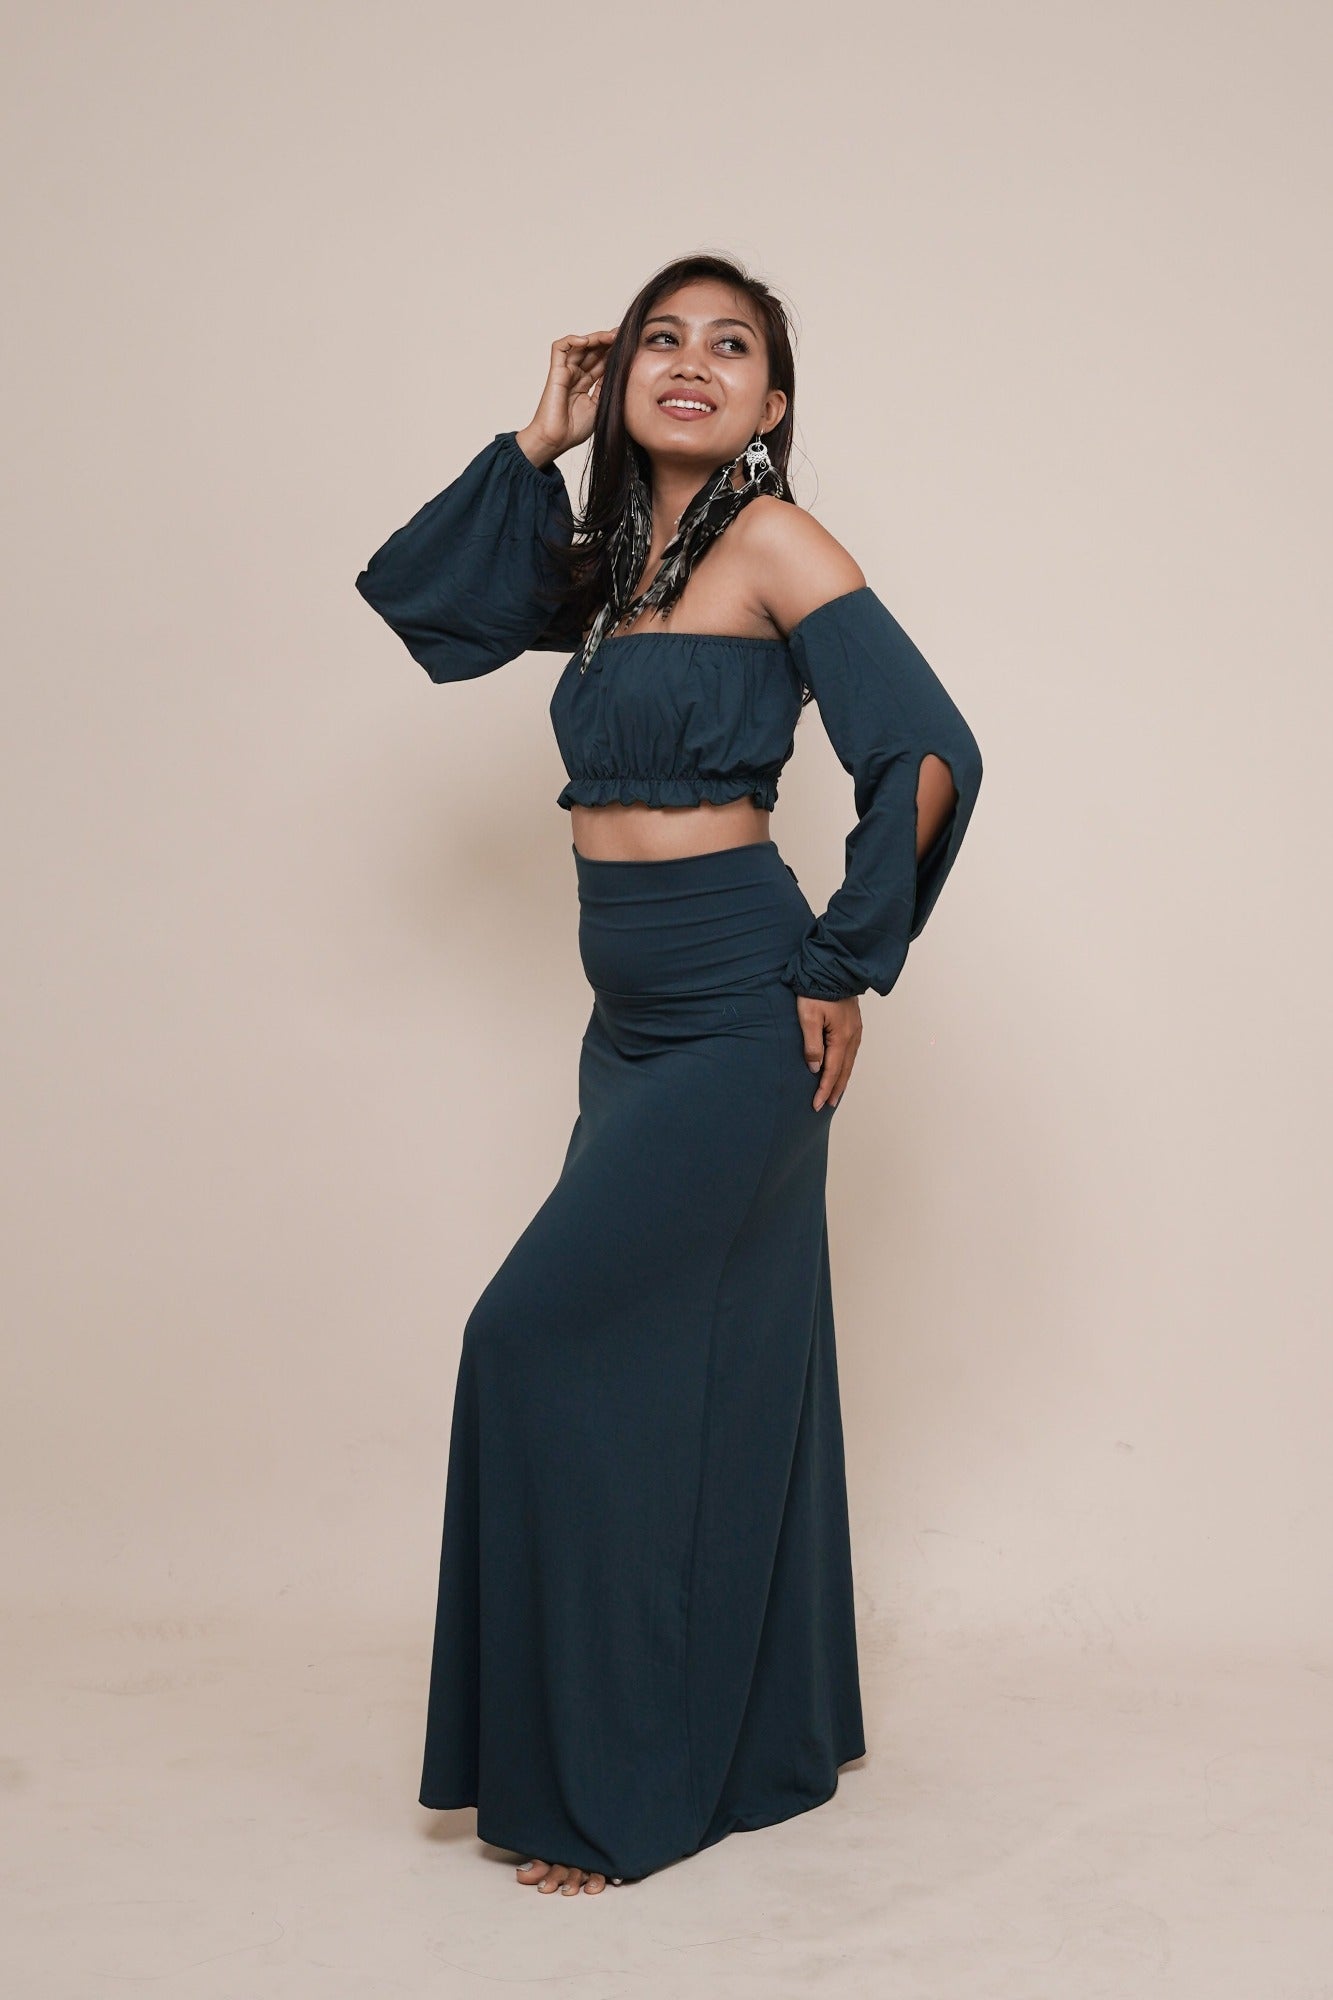 Cute off shoulder puffy sleeve boho top paired with Enchanted high waist skirt with cute back-bow in color dark teal. Women's fashion and adornments for goddesses by Bohemian Goddess